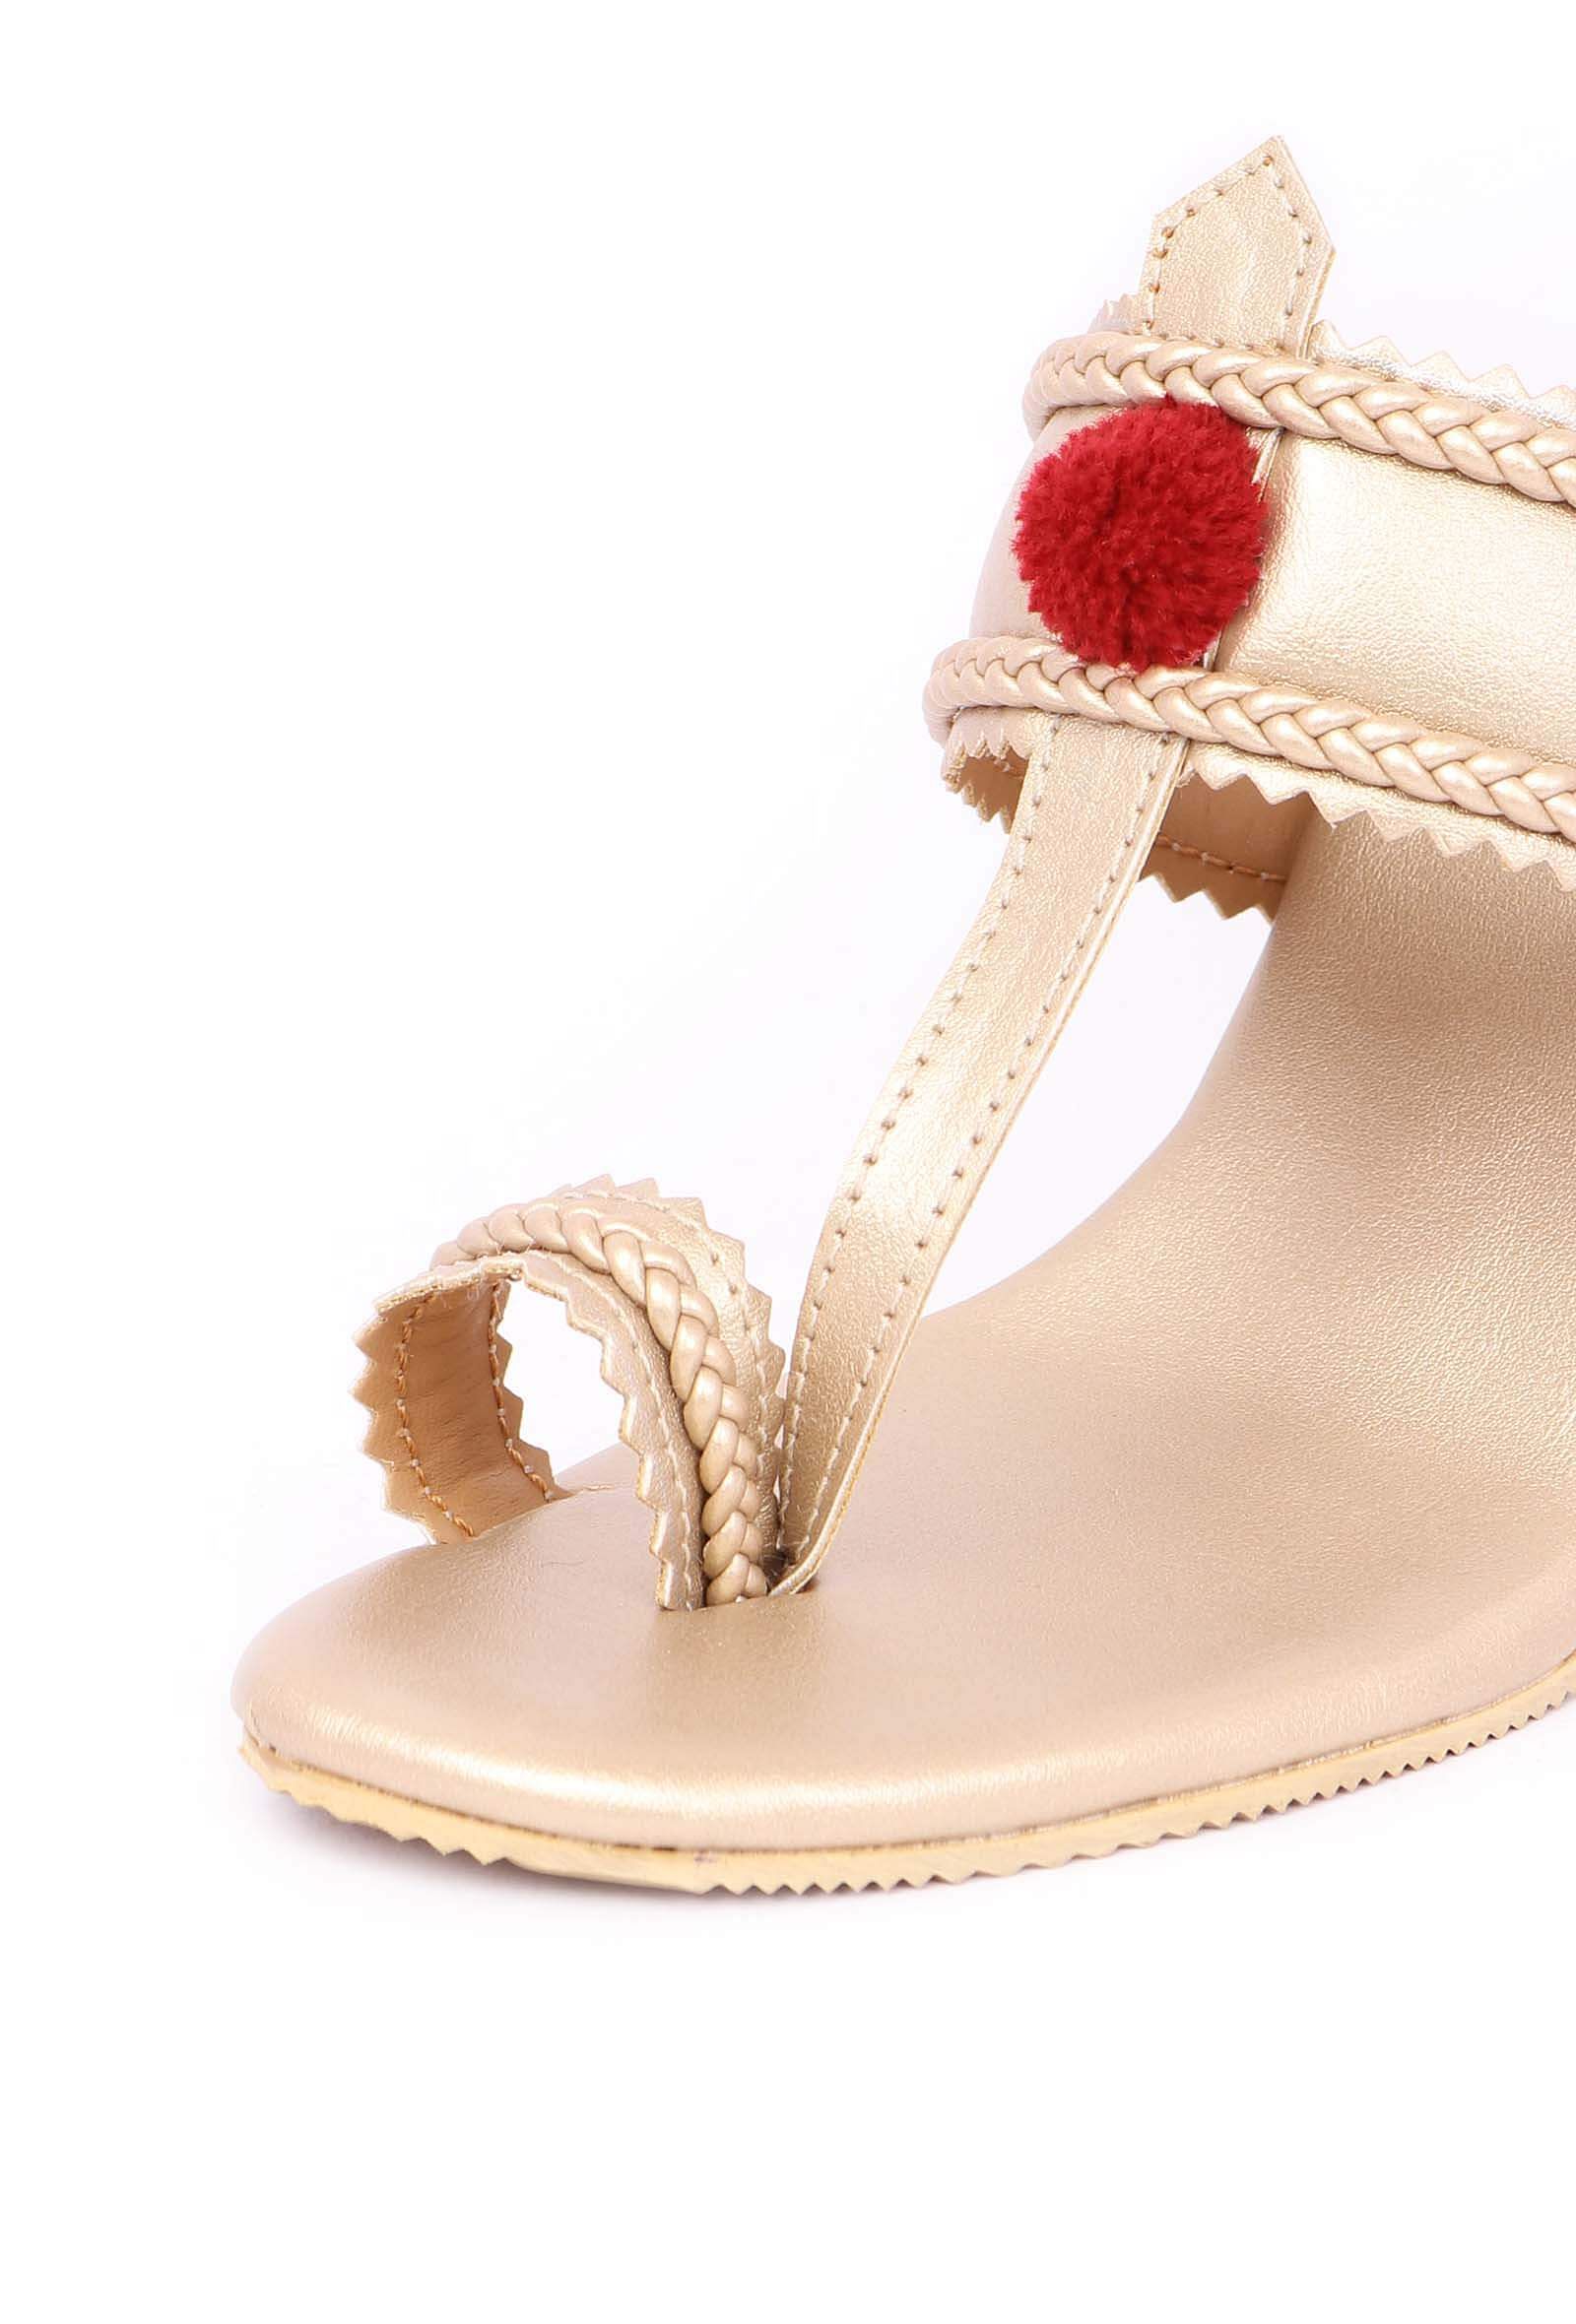 Golden Cruelty-Free Leather Heeled Sandals